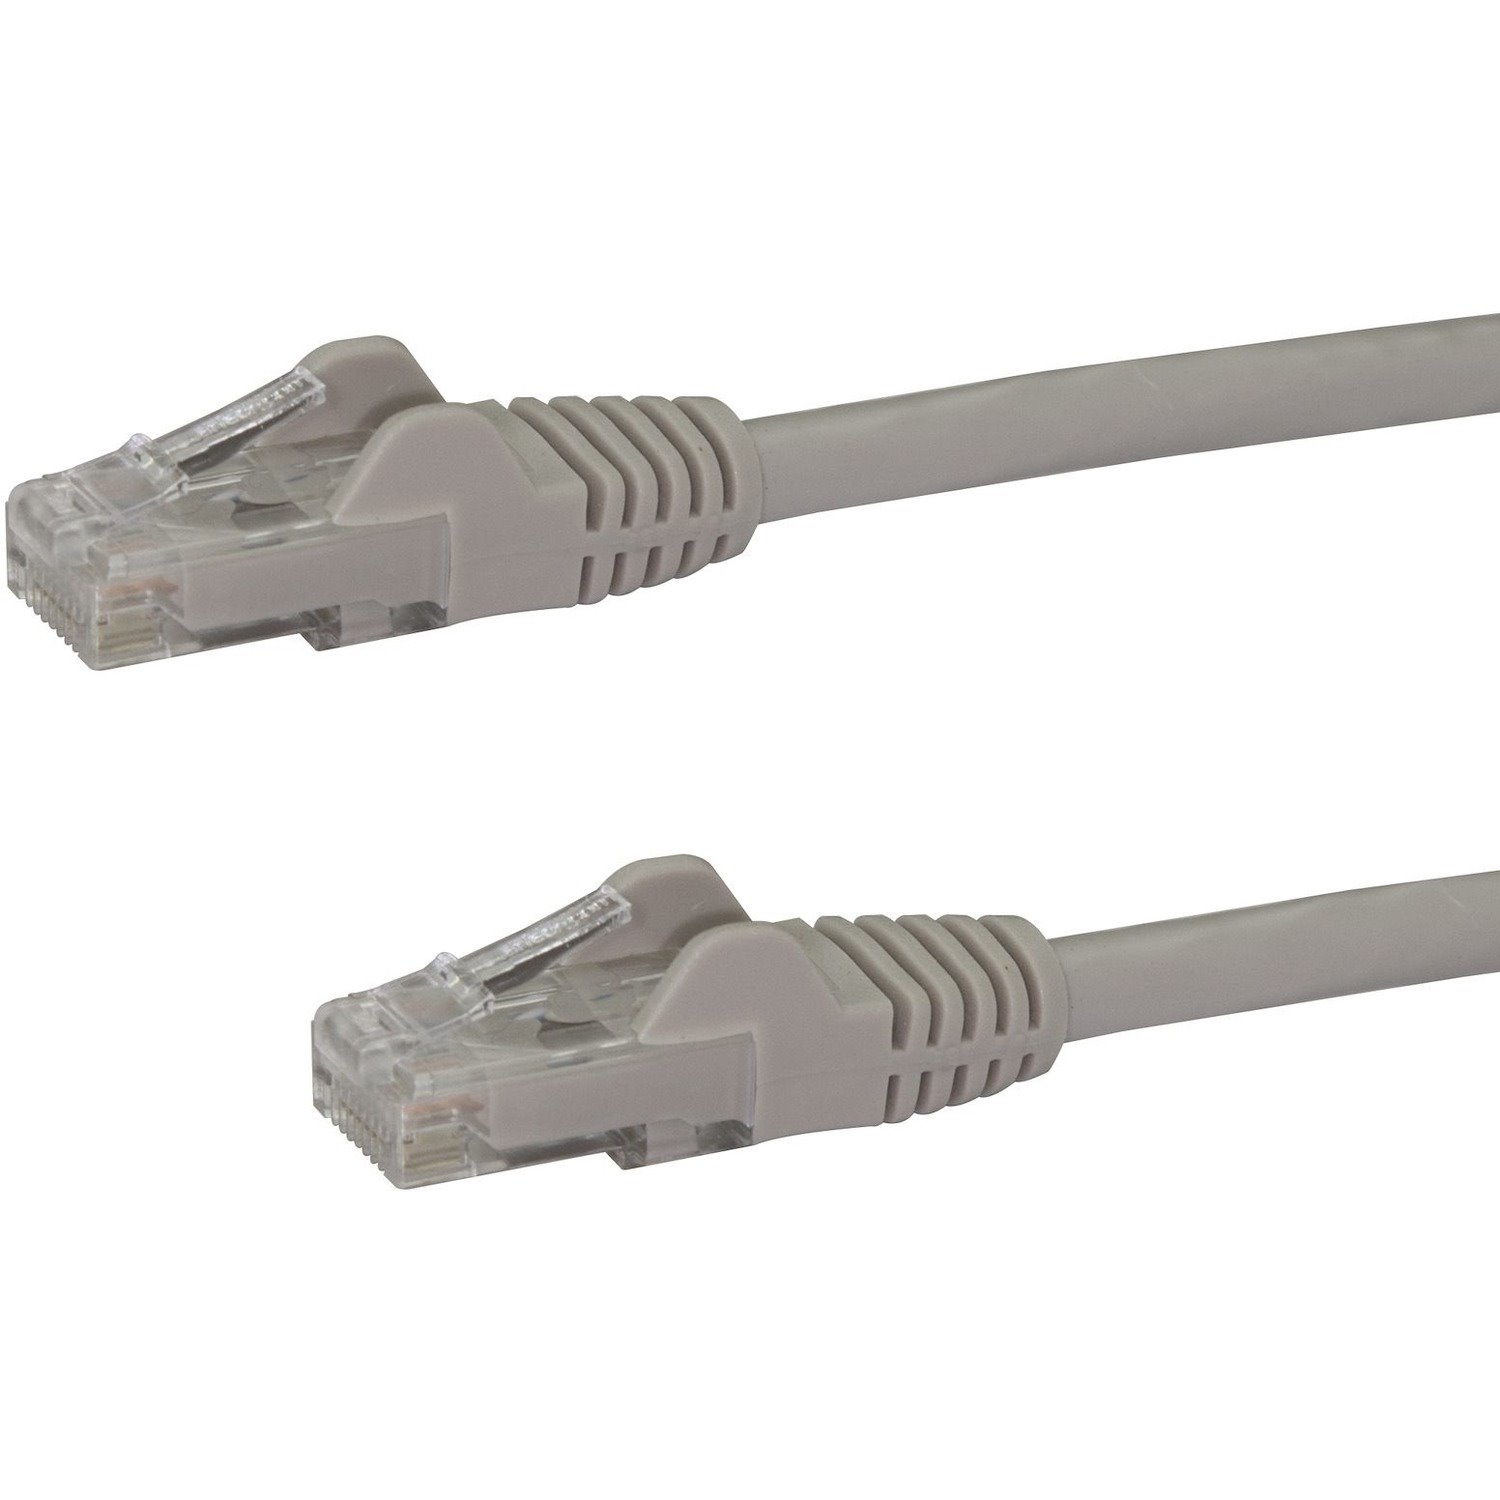 StarTech.com 75ft CAT6 Ethernet Cable - Gray Snagless Gigabit - 100W PoE UTP 650MHz Category 6 Patch Cord UL Certified Wiring/TIA